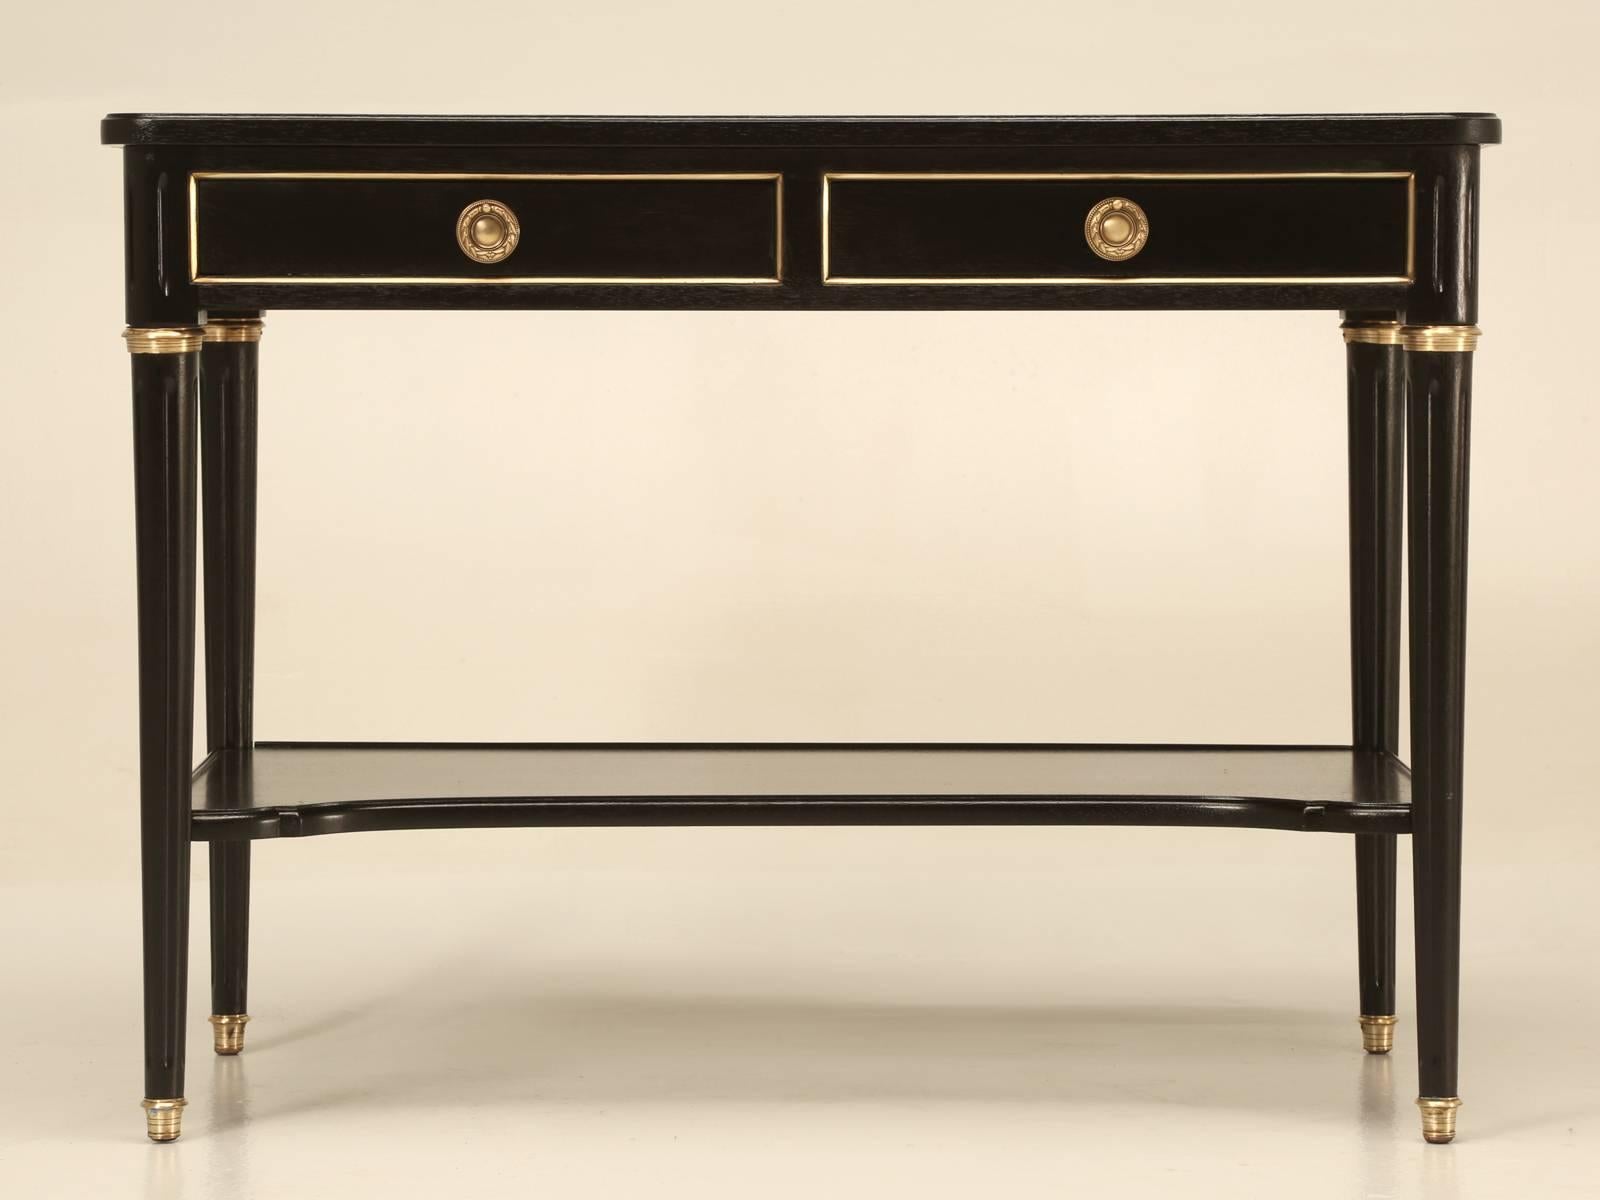 Vintage French petite console table that can be used for a myriad of different applications. Our old plank finishing department hand stripped the old tired mahogany and slowly ebonized the wood to a near perfect finish. Difficult to find a piece